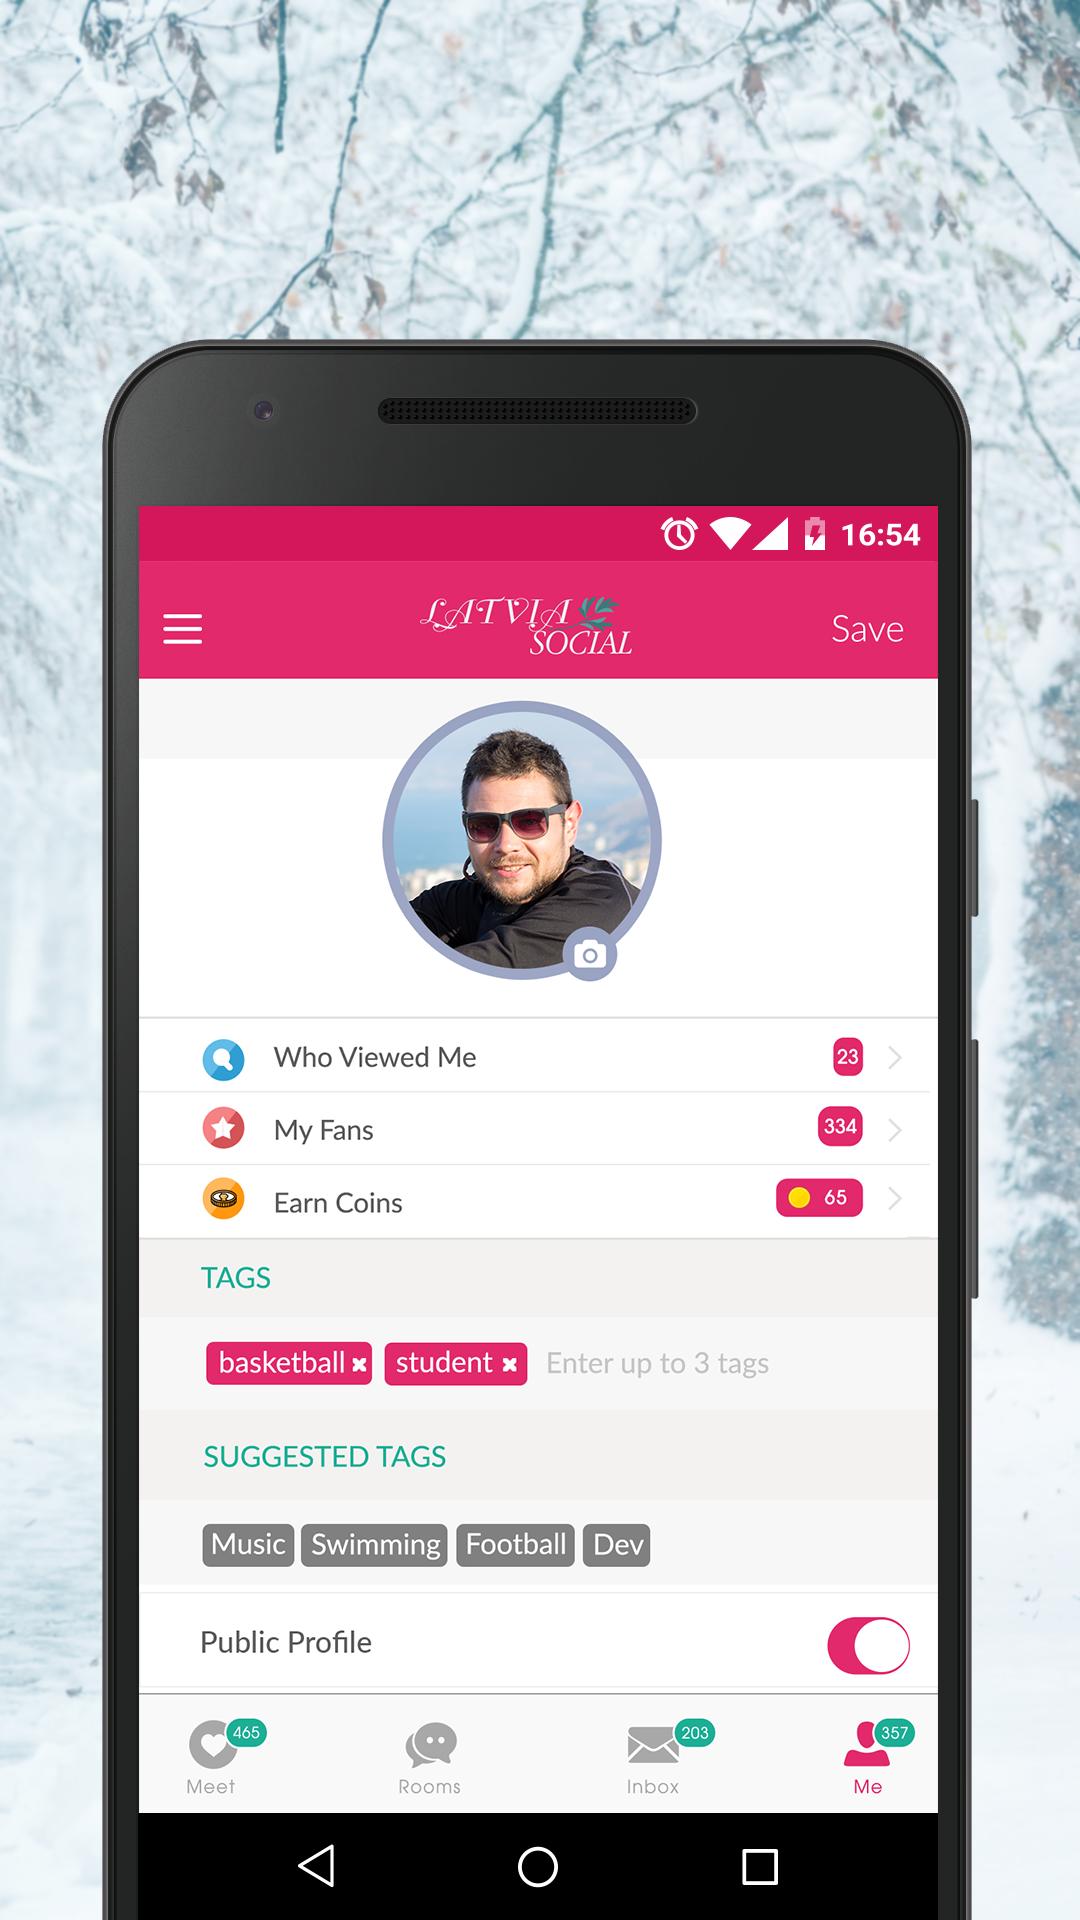 Dating - online chat & meet 1.8.7 APK Download - And…